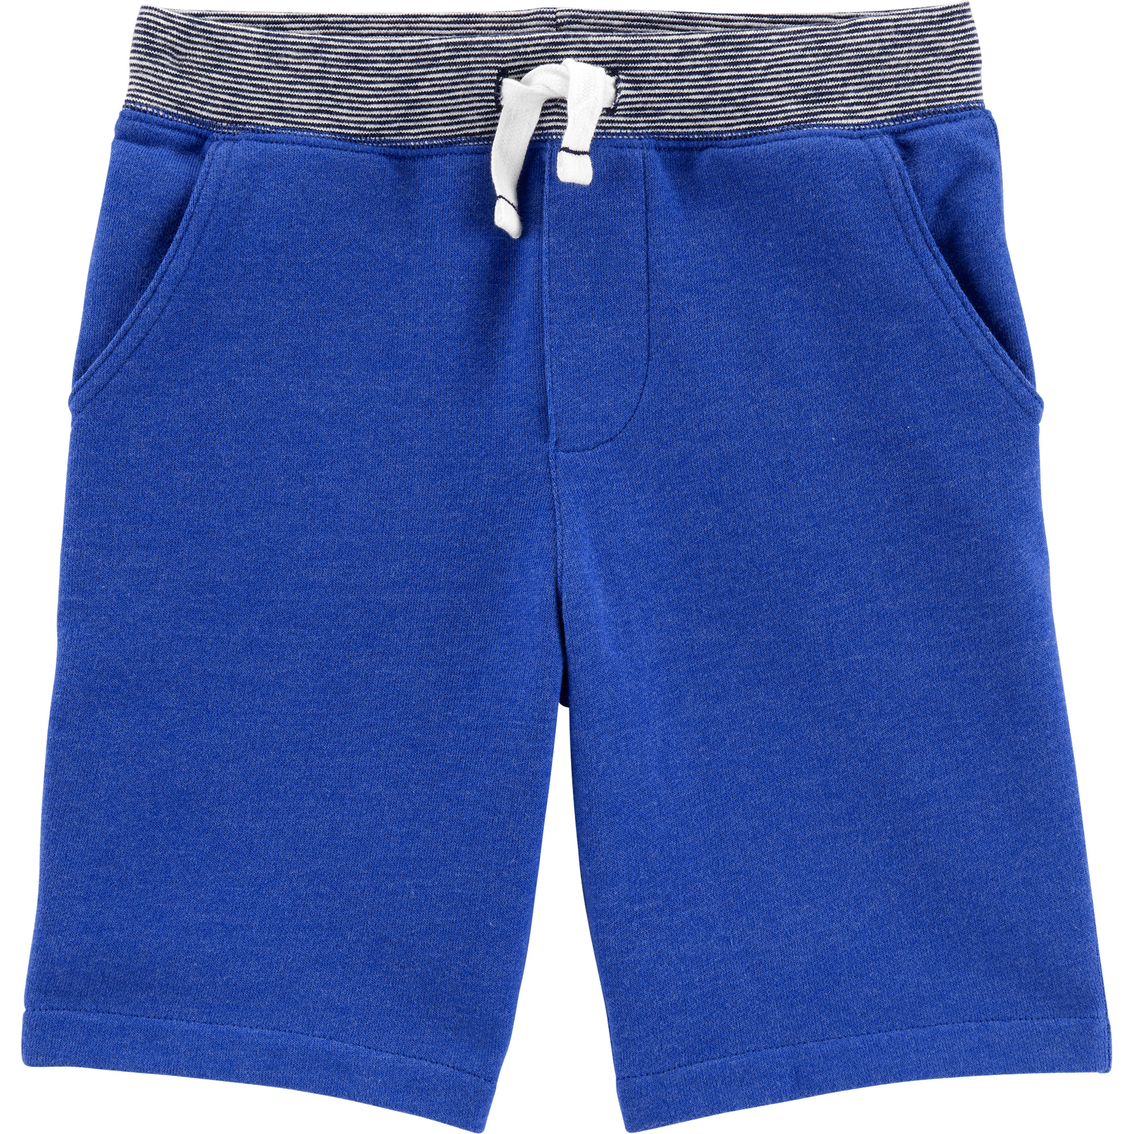 Carter's Little Boys Knit Shorts | Boys 4-7x | Clothing & Accessories ...